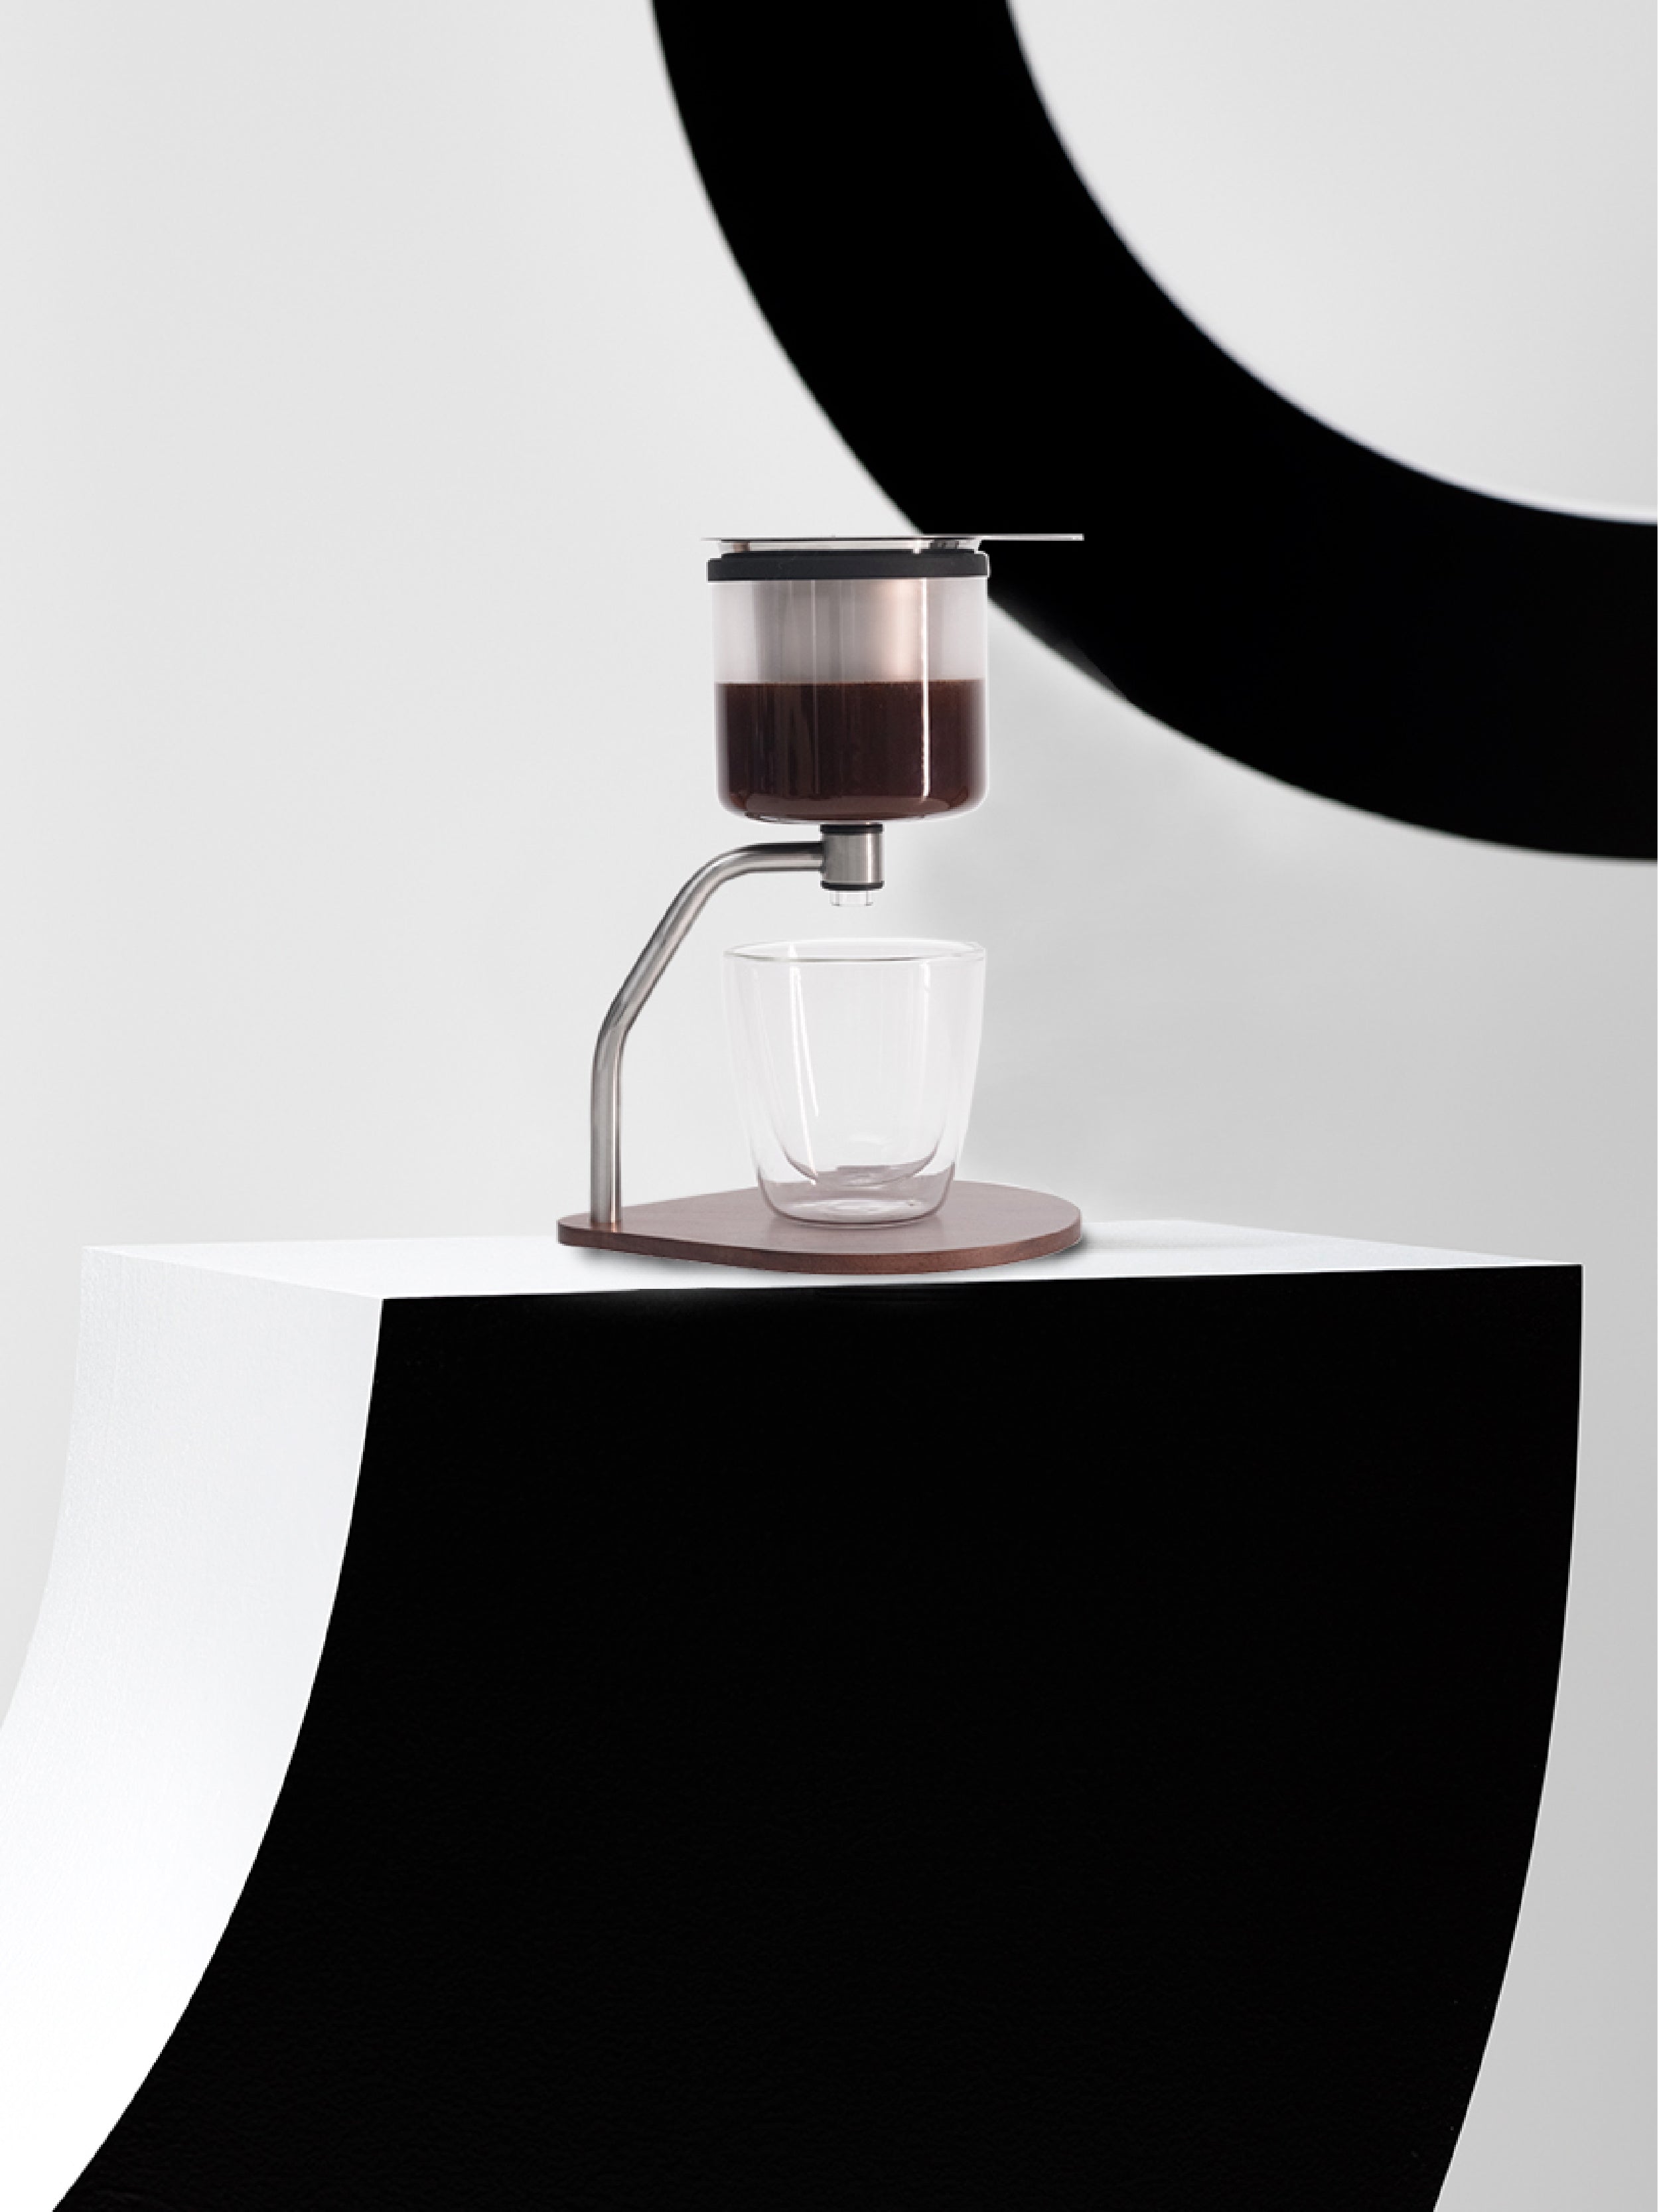 This Coffee Maker Alarm Clock Is Your Own Personal Barista